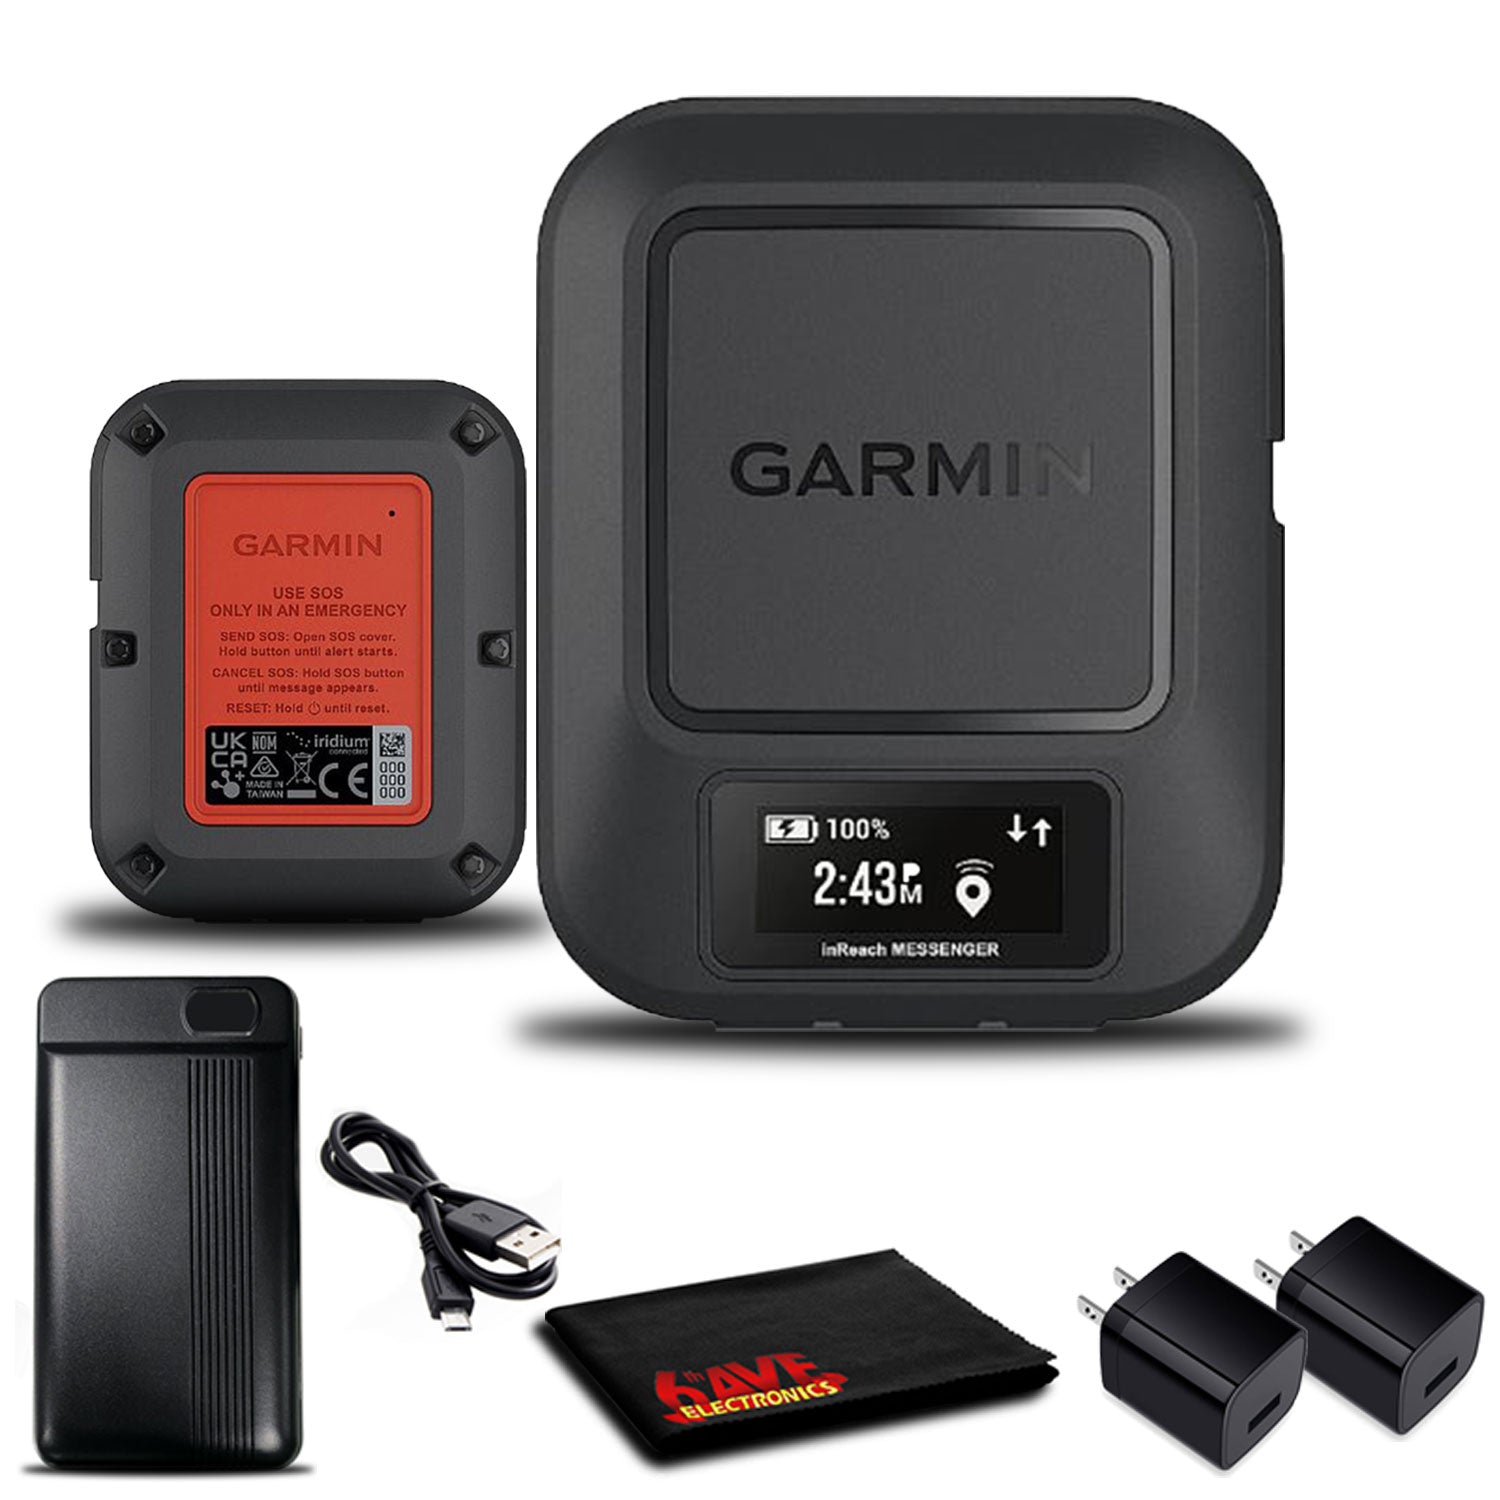 Garmin inReach Messenger GPS with Battery Charger and USB Adapter